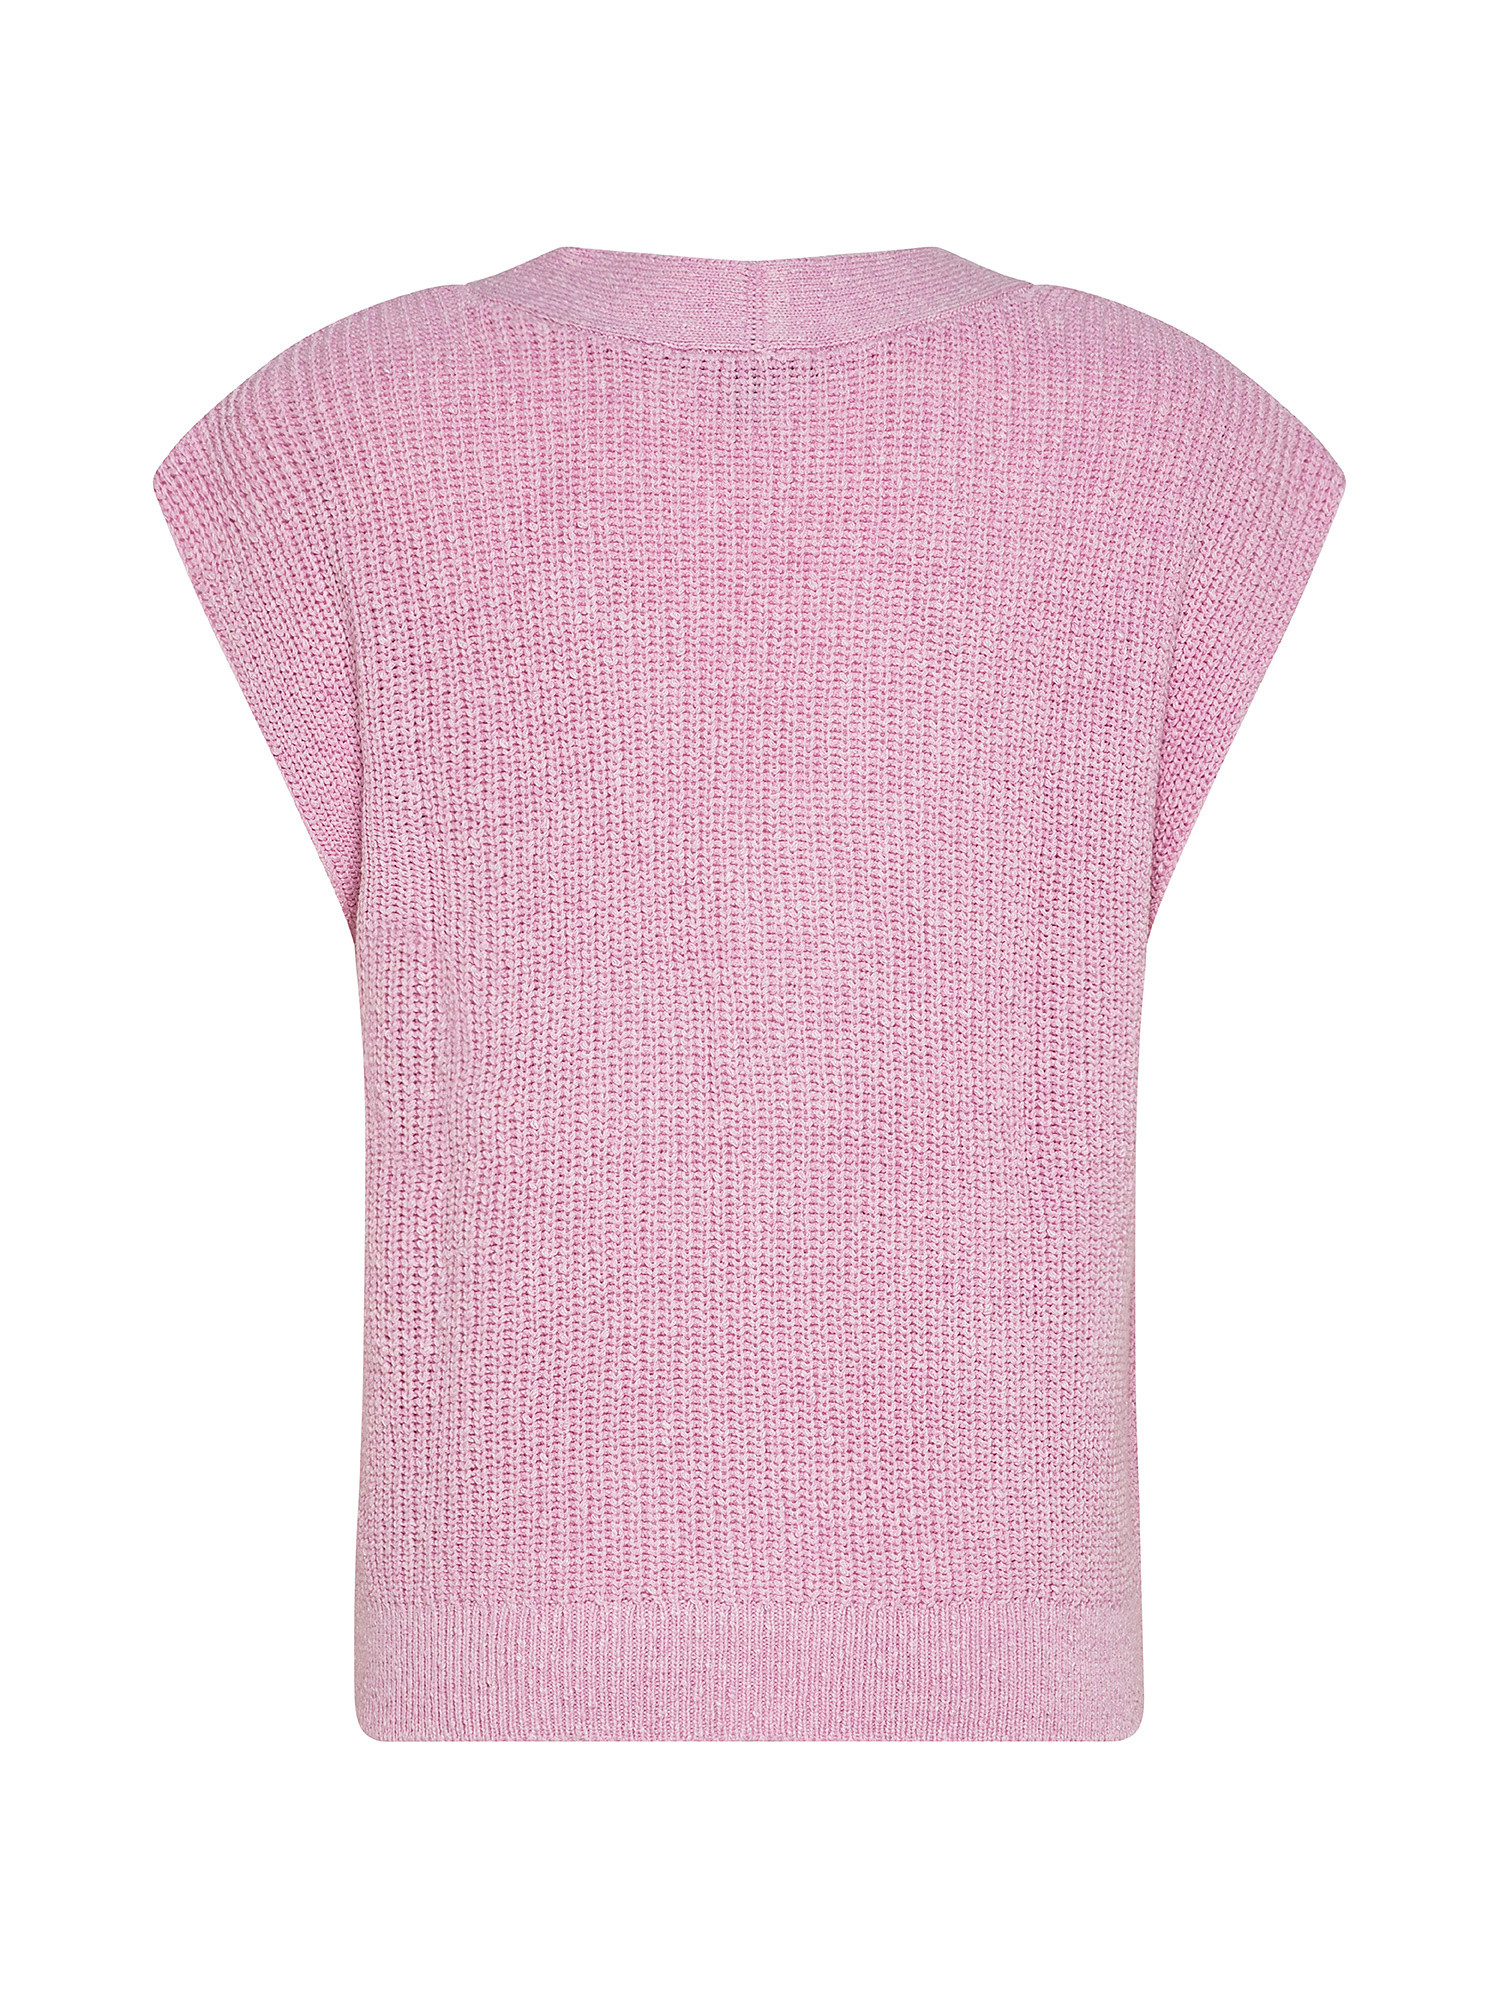 Loose-knit pullover in cotton blend, Pink, large image number 1